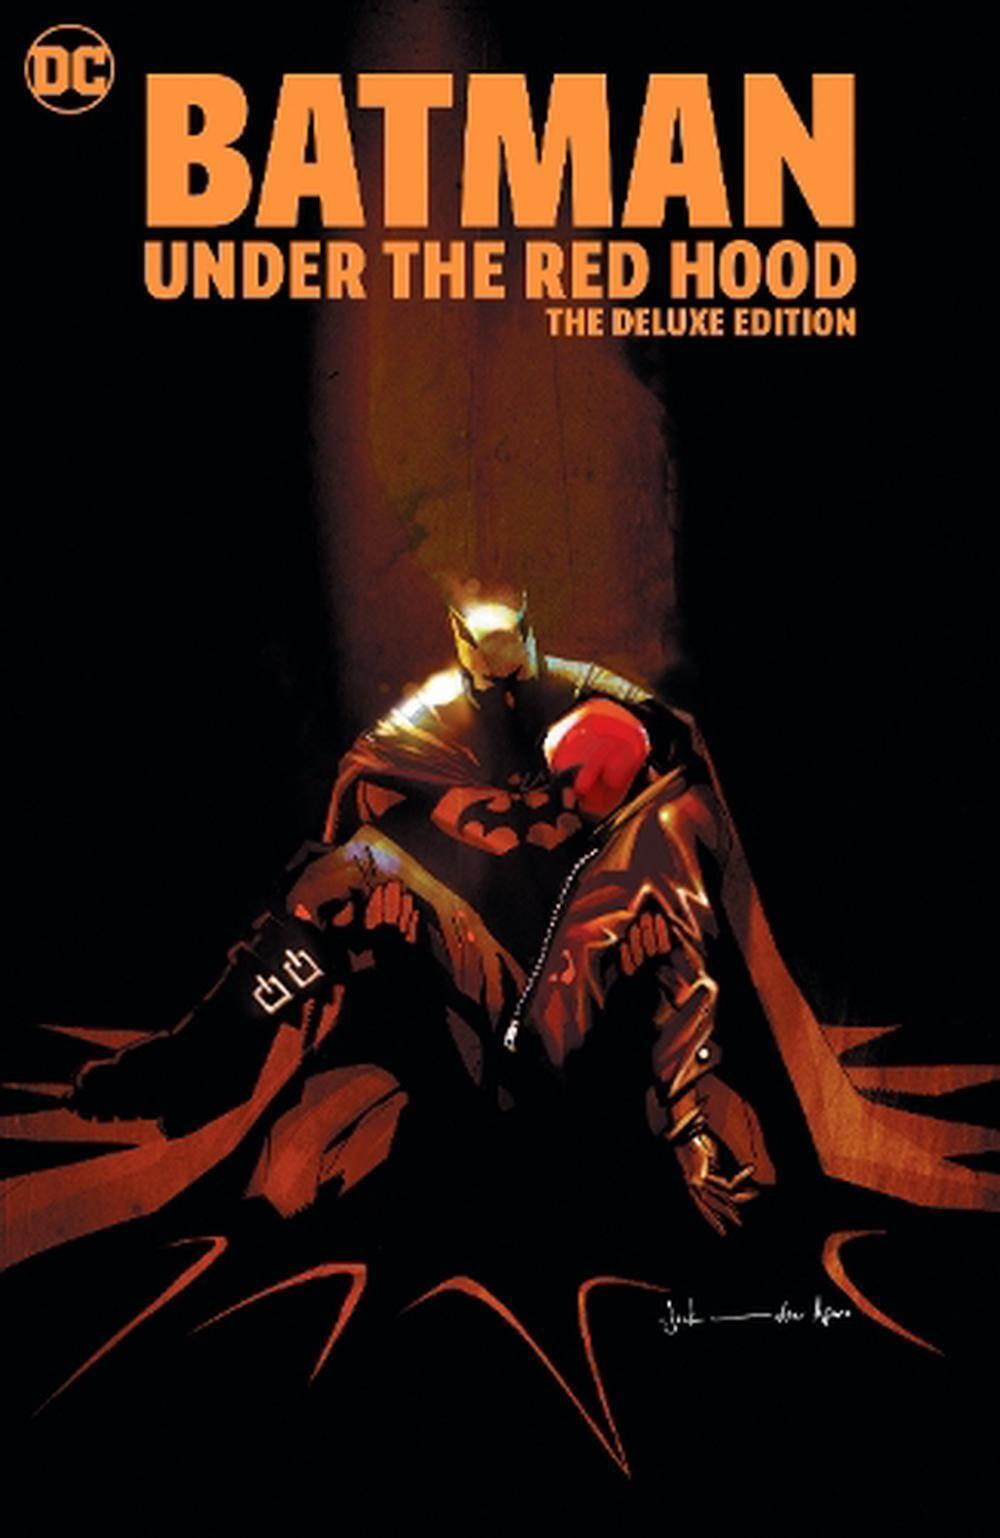 Batman: Under the Red Hood: The Deluxe Edition by Judd Winick Hardcover Book